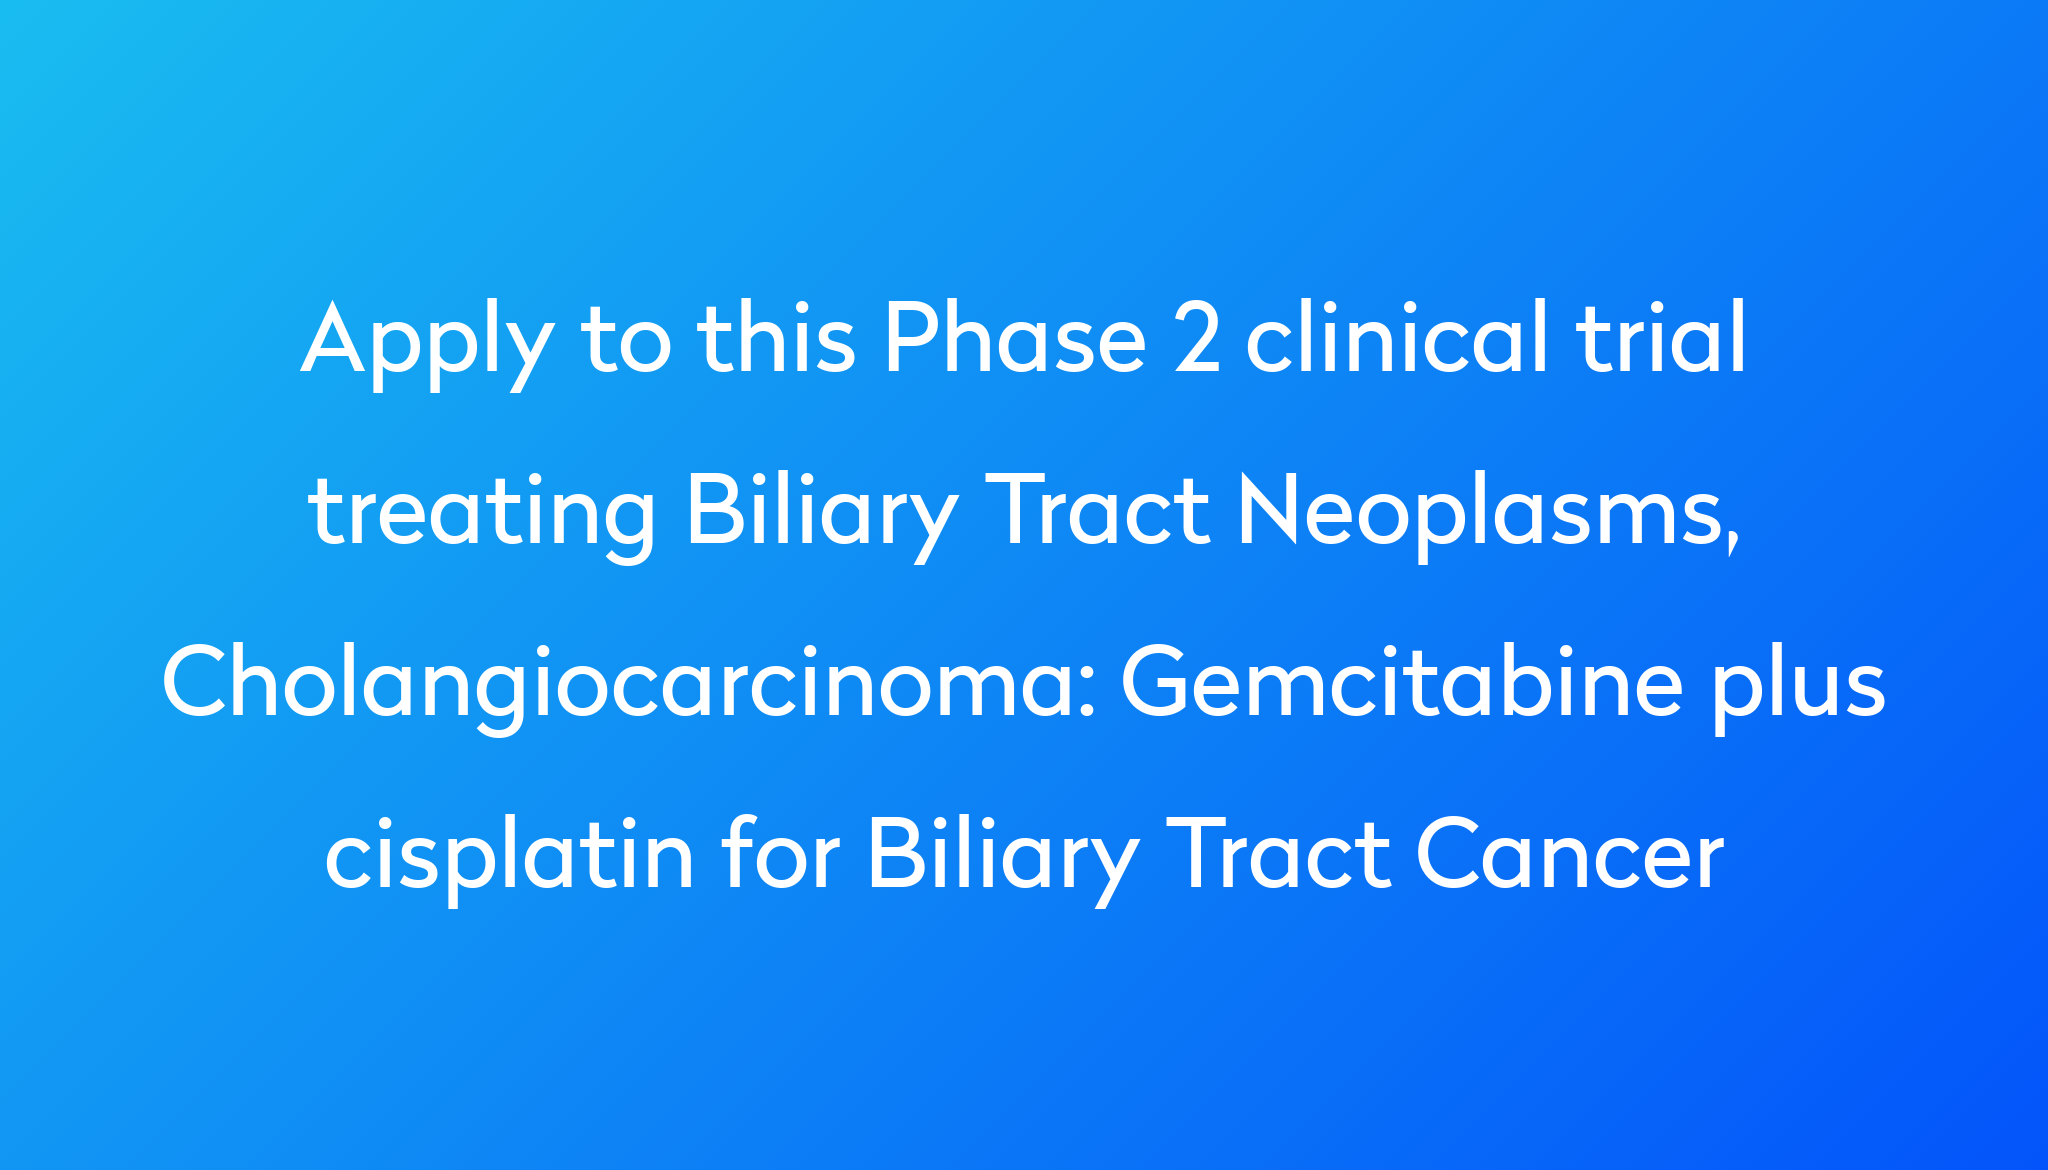 Gemcitabine plus cisplatin for Biliary Tract Cancer Clinical Trial Power